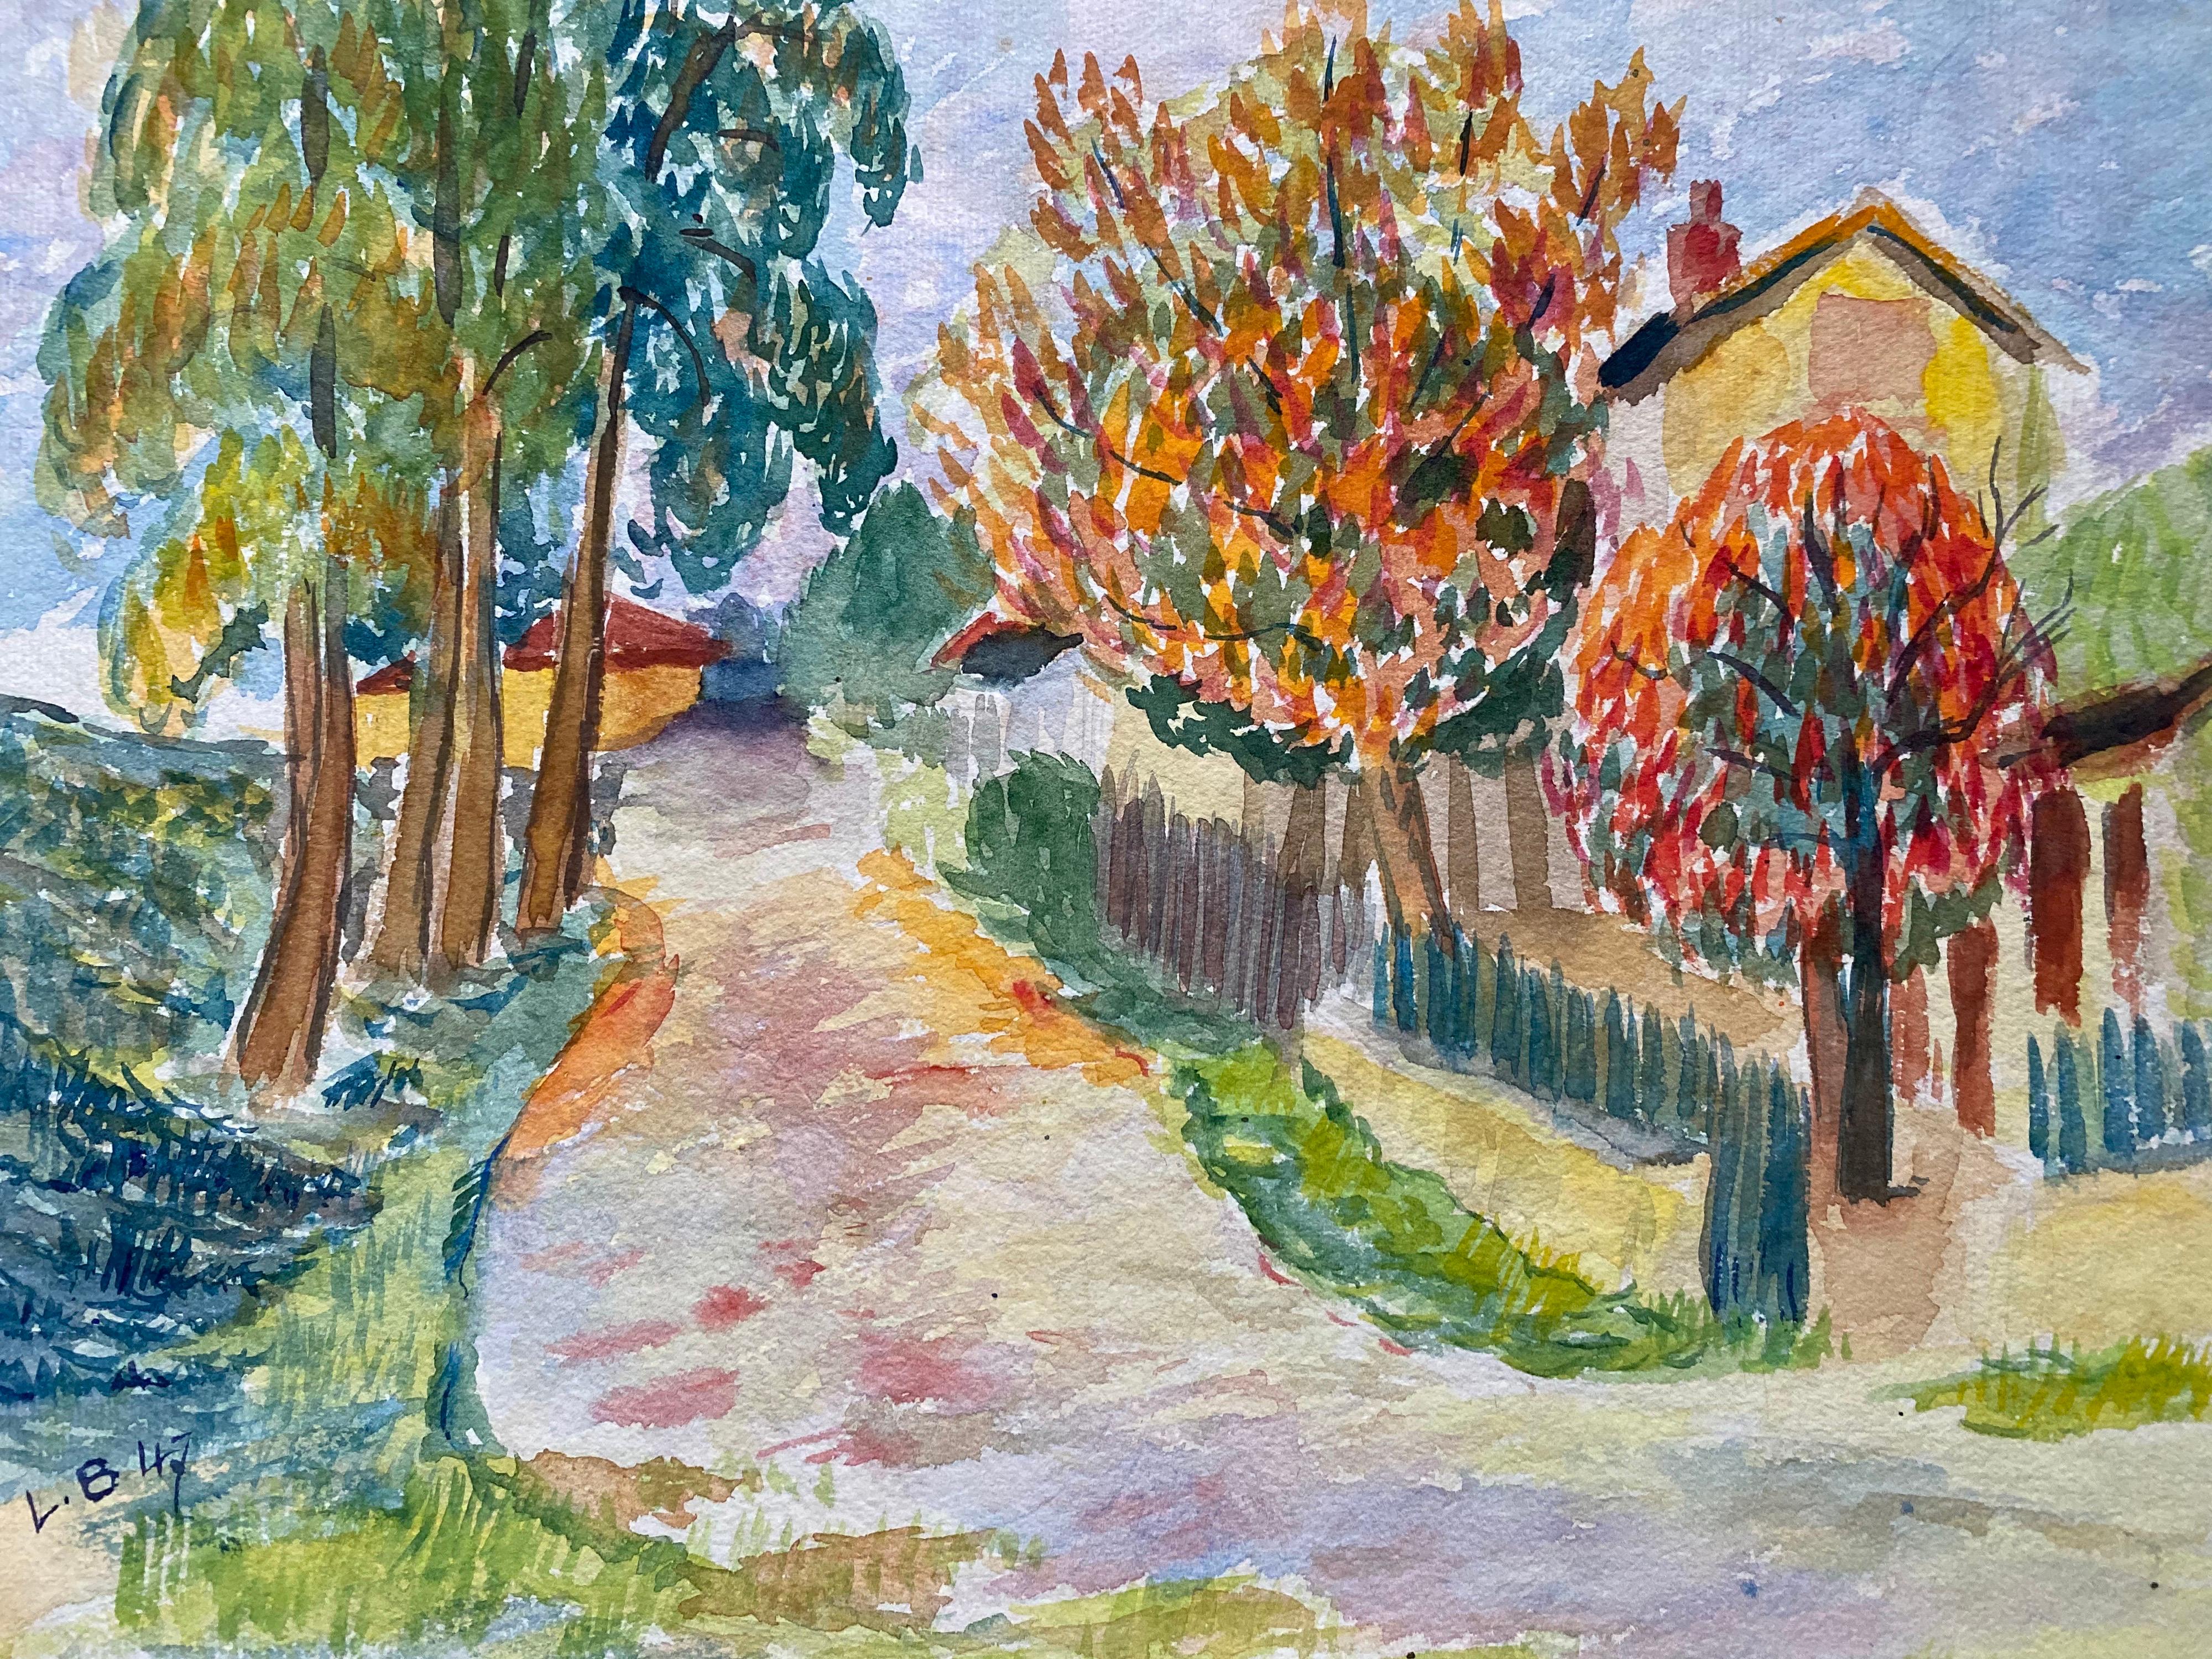 1940's Provence French Orange and Green Landscape  - Post Impressionist artist - Painting by Louis Bellon